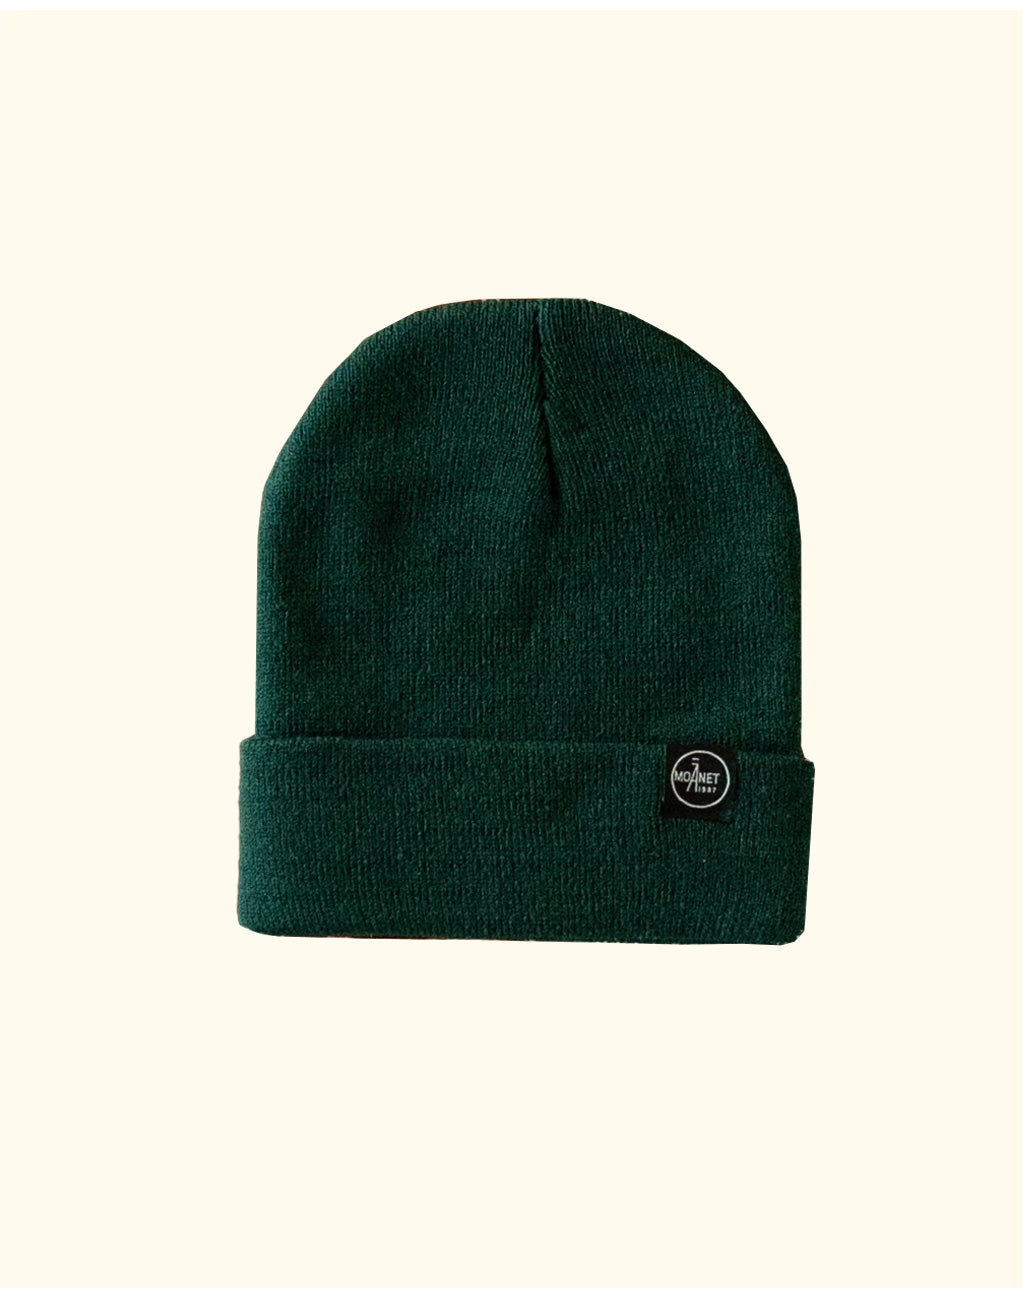 Beanie ”forest green” - MOANET